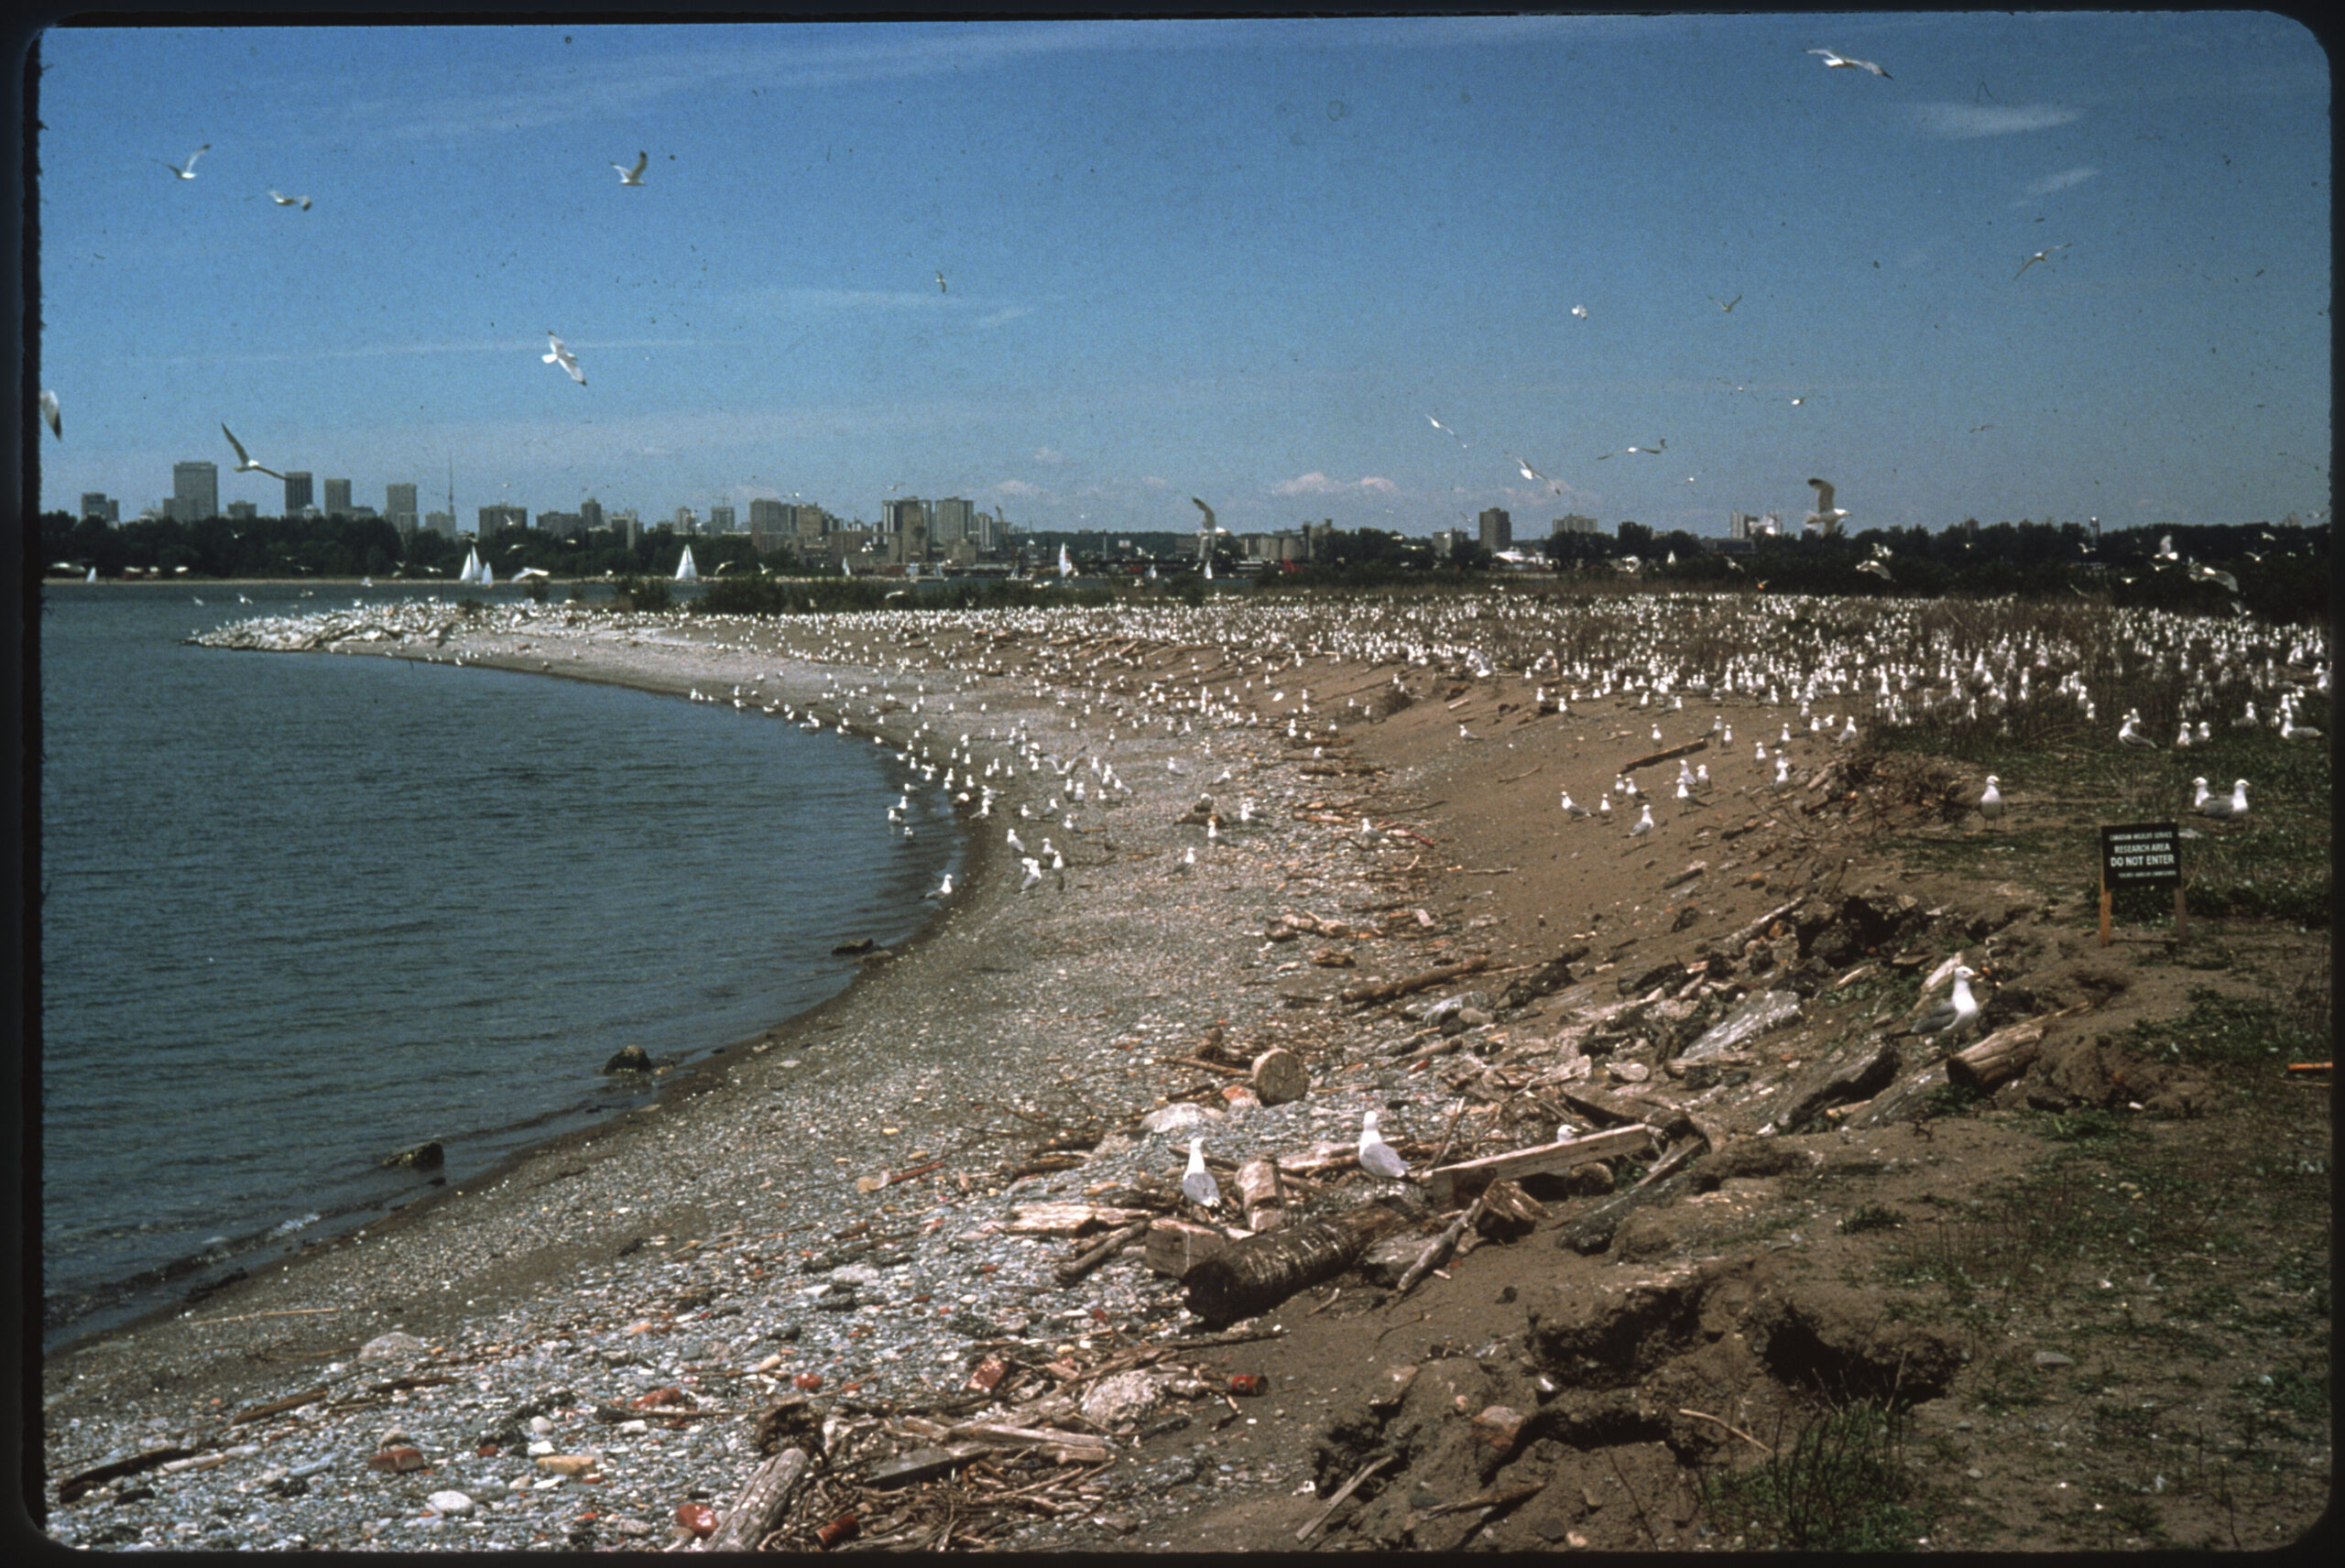 A large flock of seagulls gathers on a rocky beach, some flying overhead but most standing on the ground. On the left side of the photo, the beach curves around blue water. The right side of the photo shows the beach raising in elevation to a grassy area. In the far distance, a number of tall buildings can be seen.